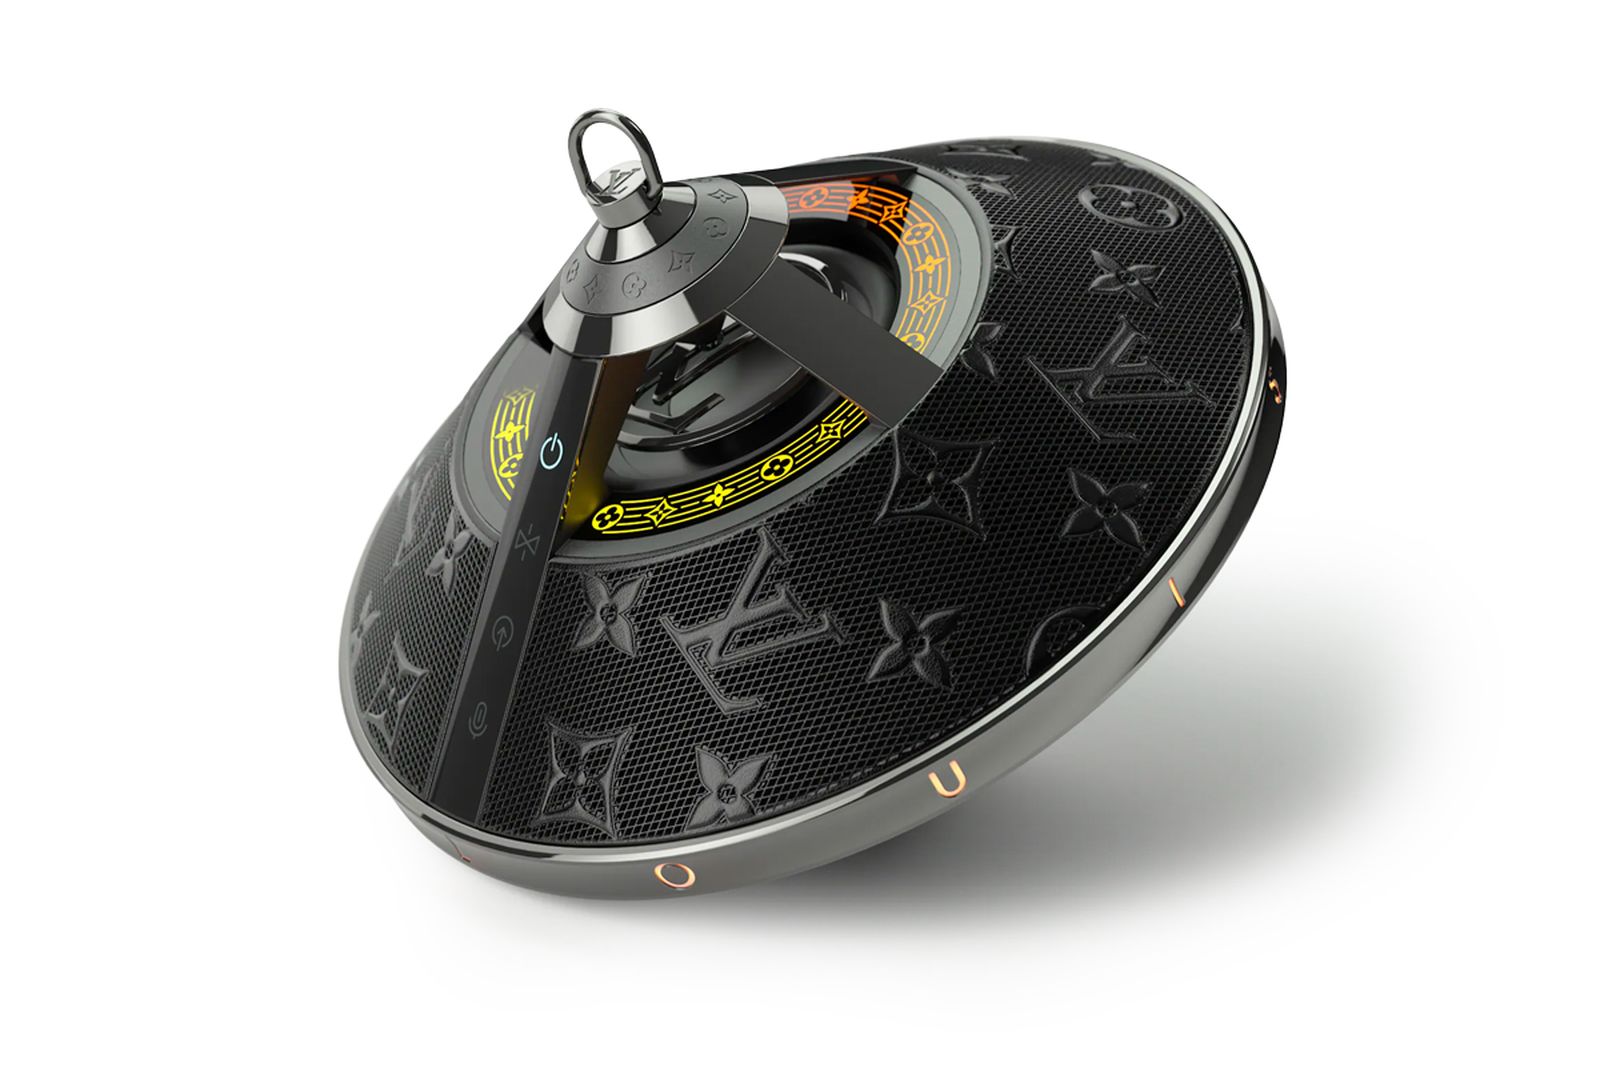 louis-vuitton-sold-3000-3000-ufo-speakers-on-the-first-day-alone-07